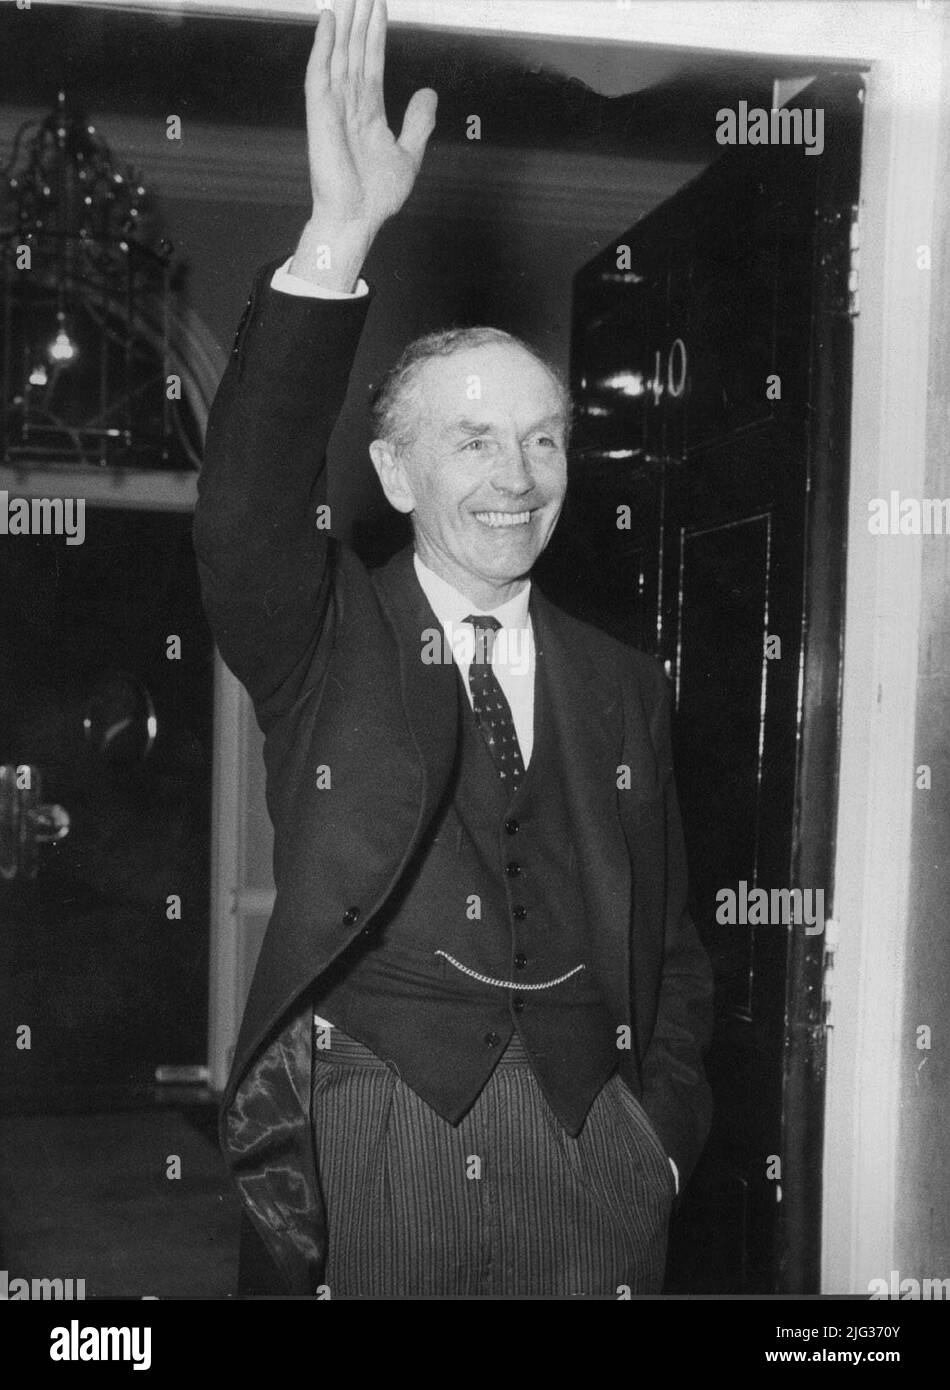 File photo dated 08/04/64 of Sir Alec Douglas-Home, the Prime Minister, who earlier had visited the Queen at Buckingham Palace stands, one hand in his pocket, and wavin to the bank of photographers at his return to No. 10 Downing Street, London. Boris Johnson has now overtaken six prime ministers with the shortest time in office since 1900: Andrew Bonar Law (211 days in 1922-23), Alec Douglas-Home (364 days in 1963-64), Anthony Eden (644 days in 1955-57), Henry Campbell-Bannerman (852 days in 1905-08), Gordon Brown (1,049 days in 2007-10) and Neville Chamberlain (1,078 days in 1937-40). Issue  Stock Photo